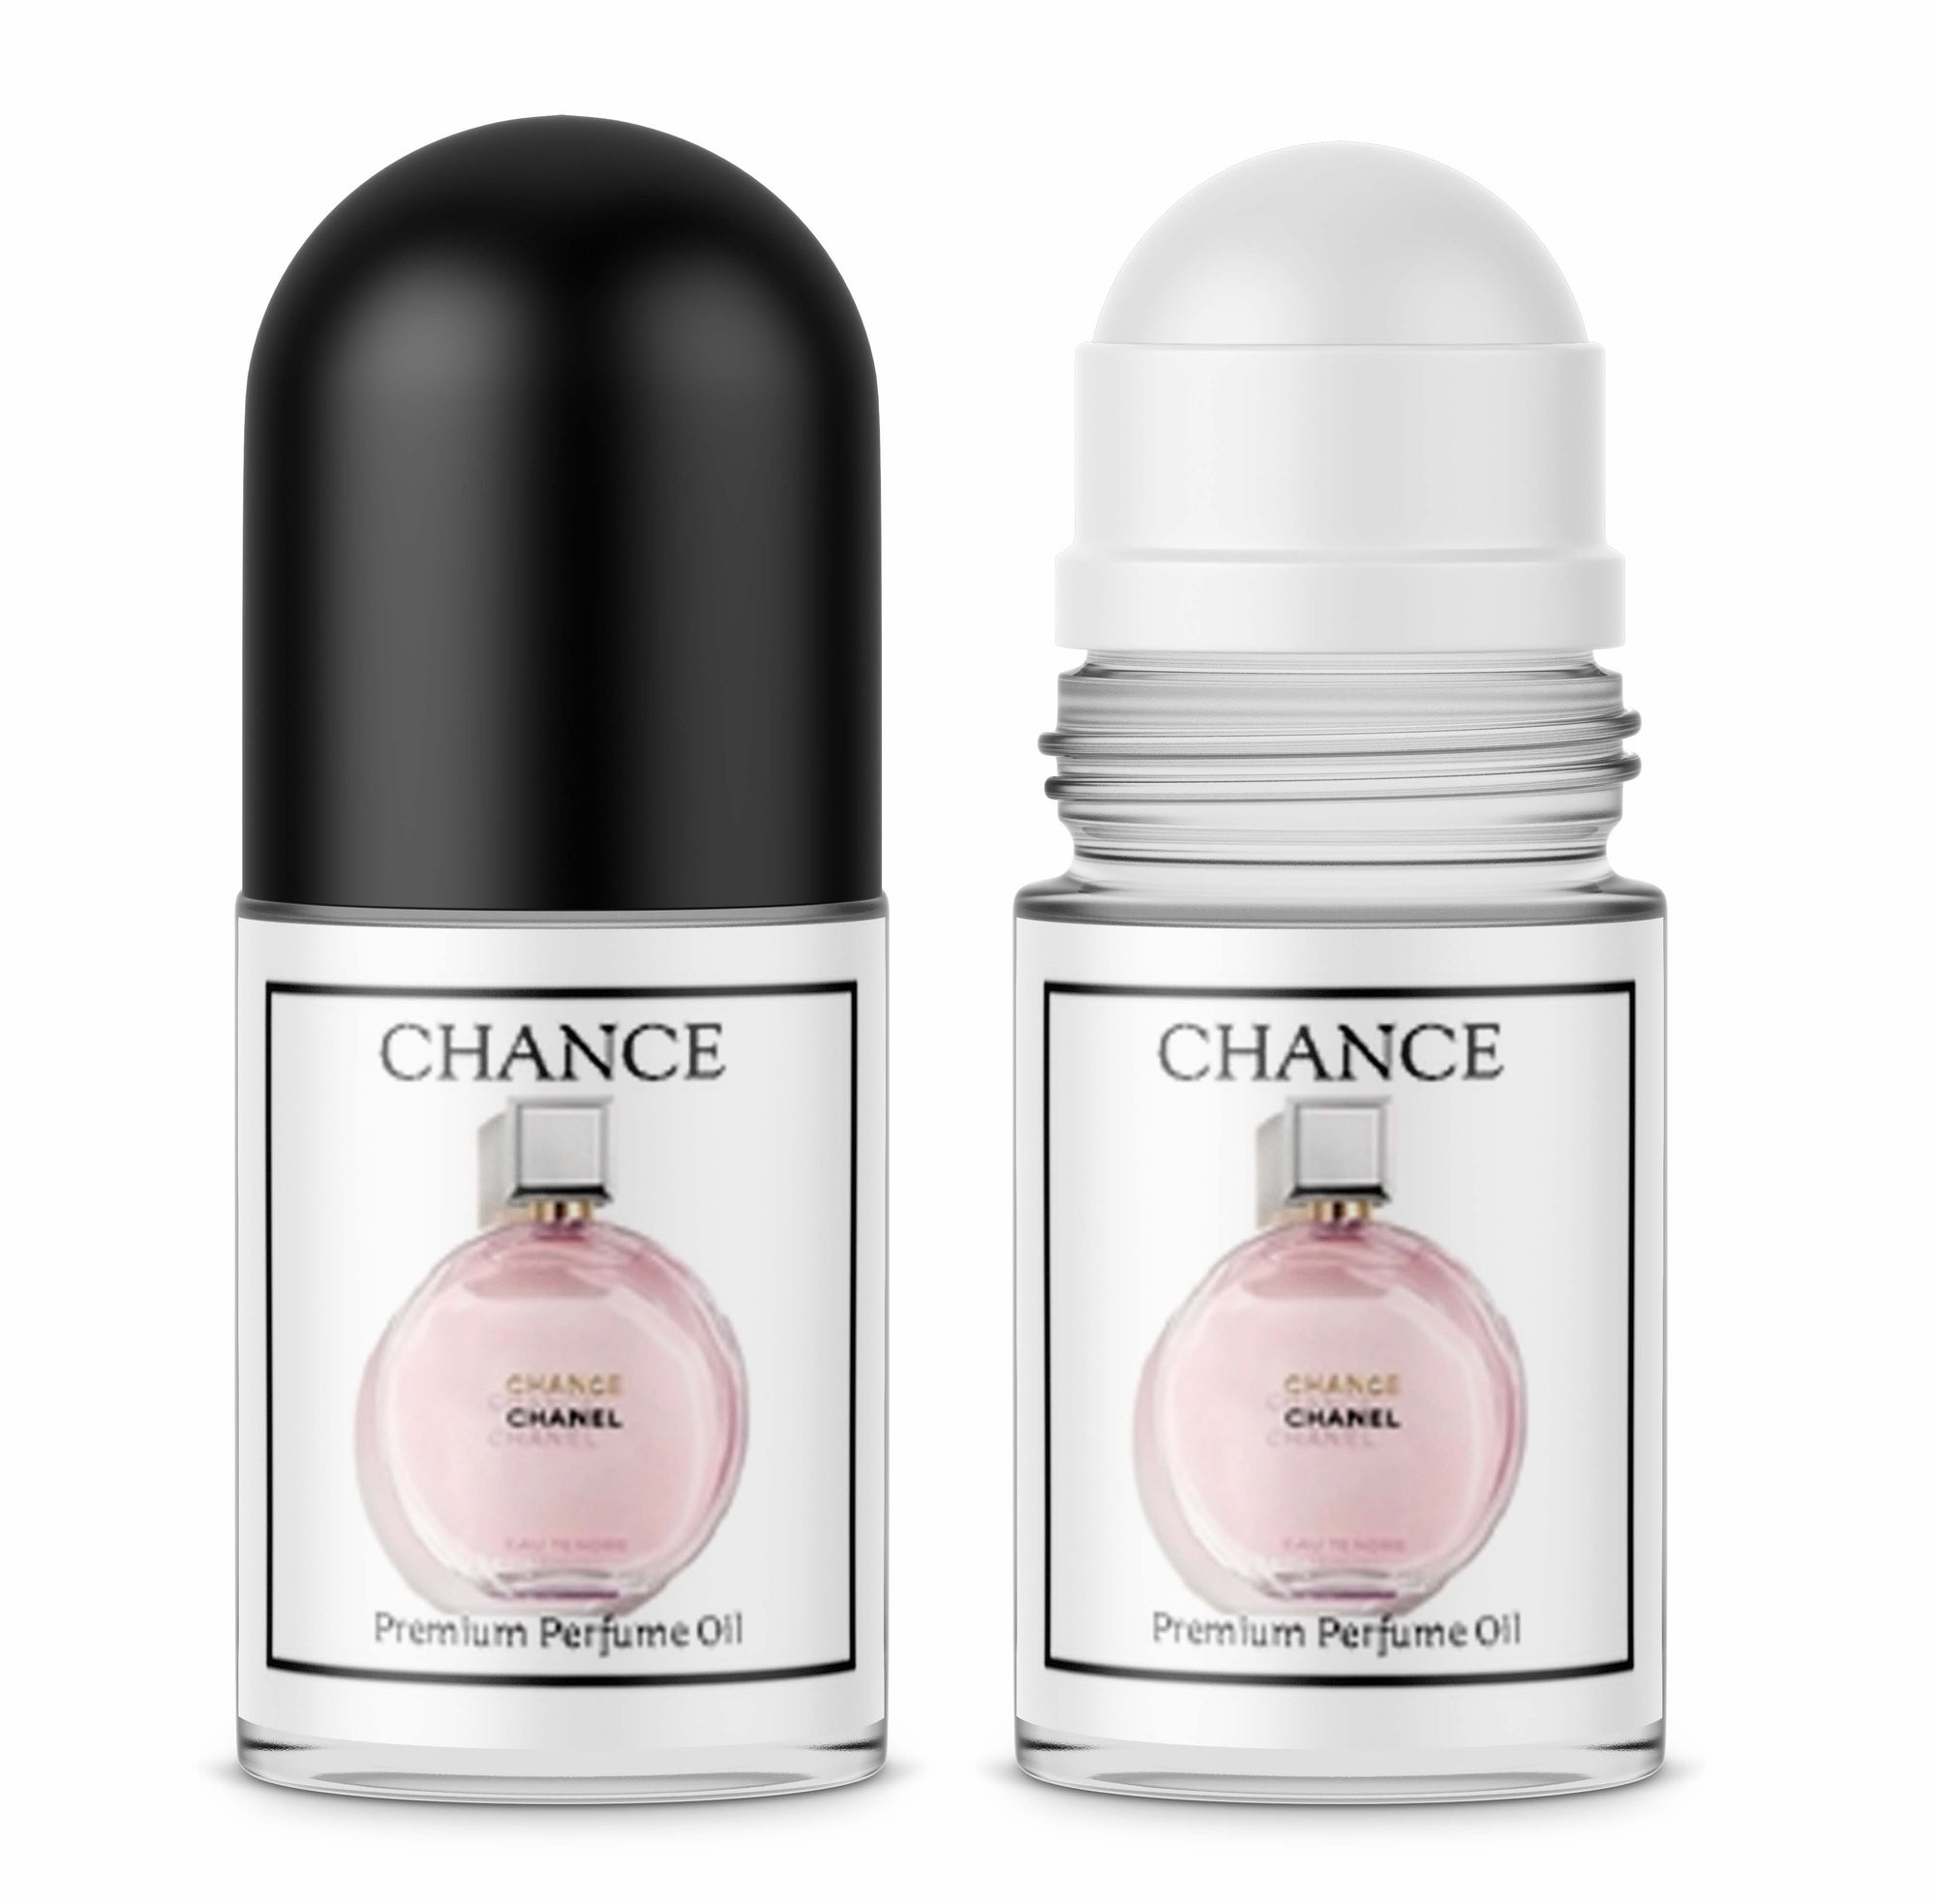 Chanel Chance Roll On Perfume Oil